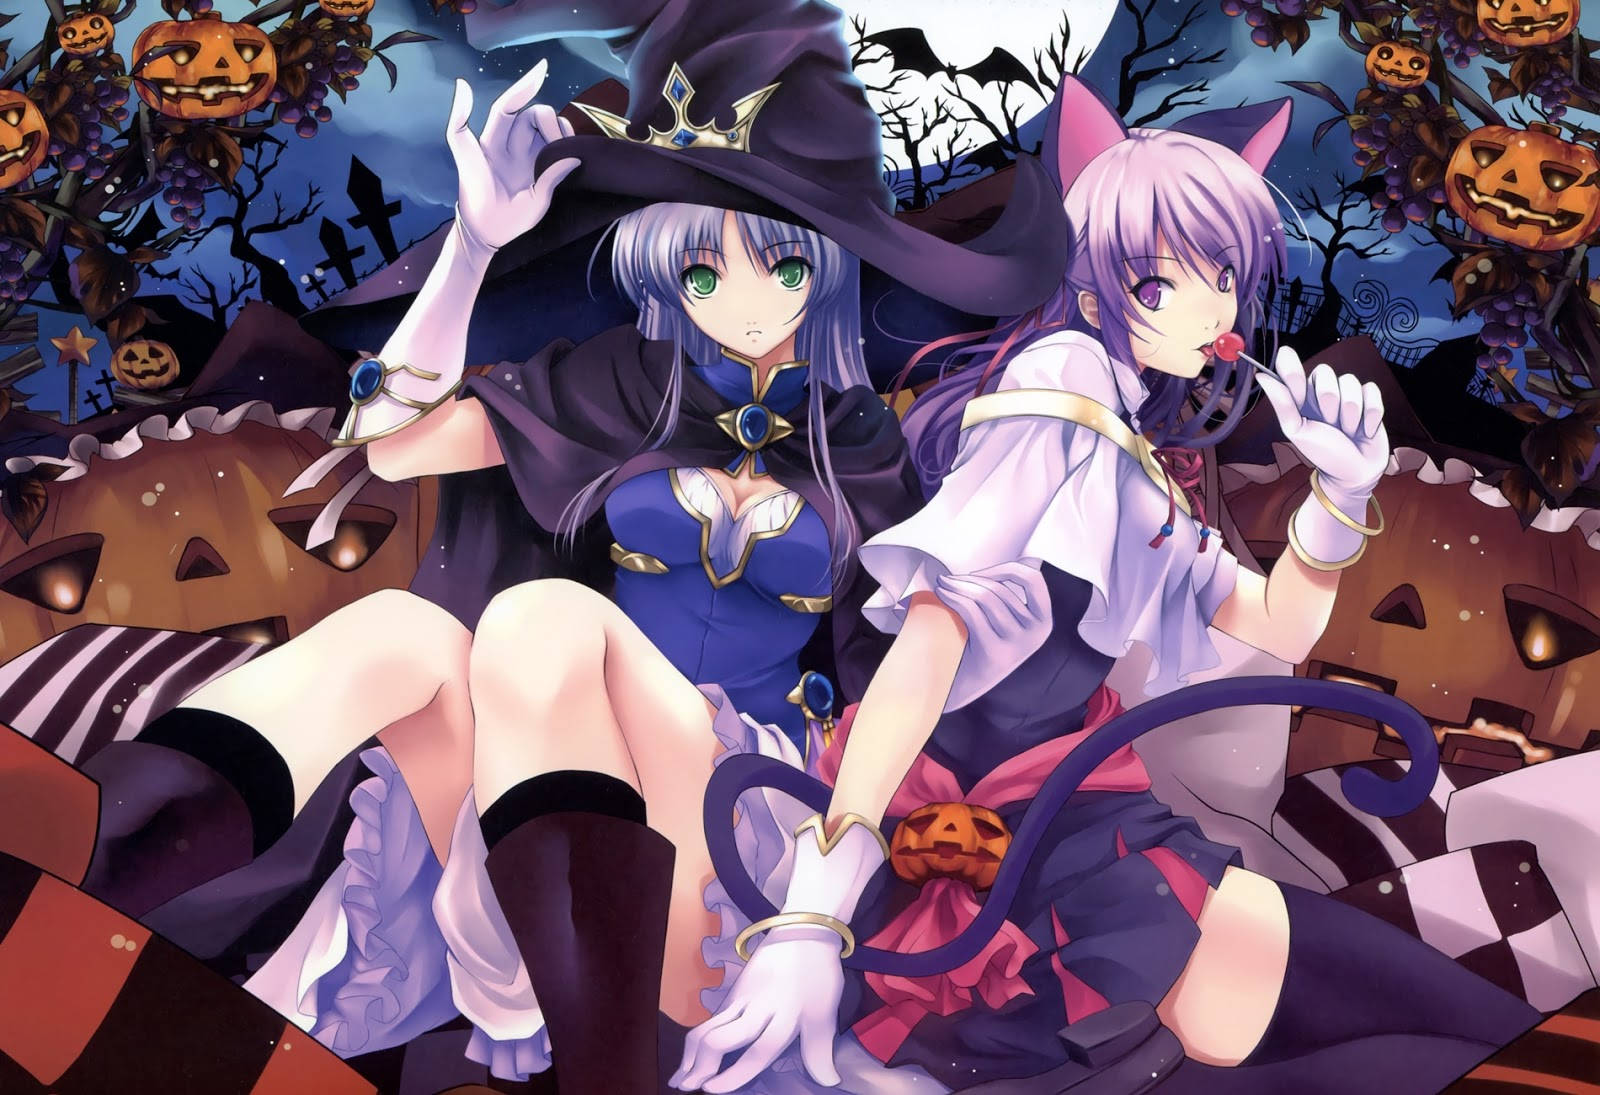 Celebrate Halloween in style with anime characters! Wallpaper